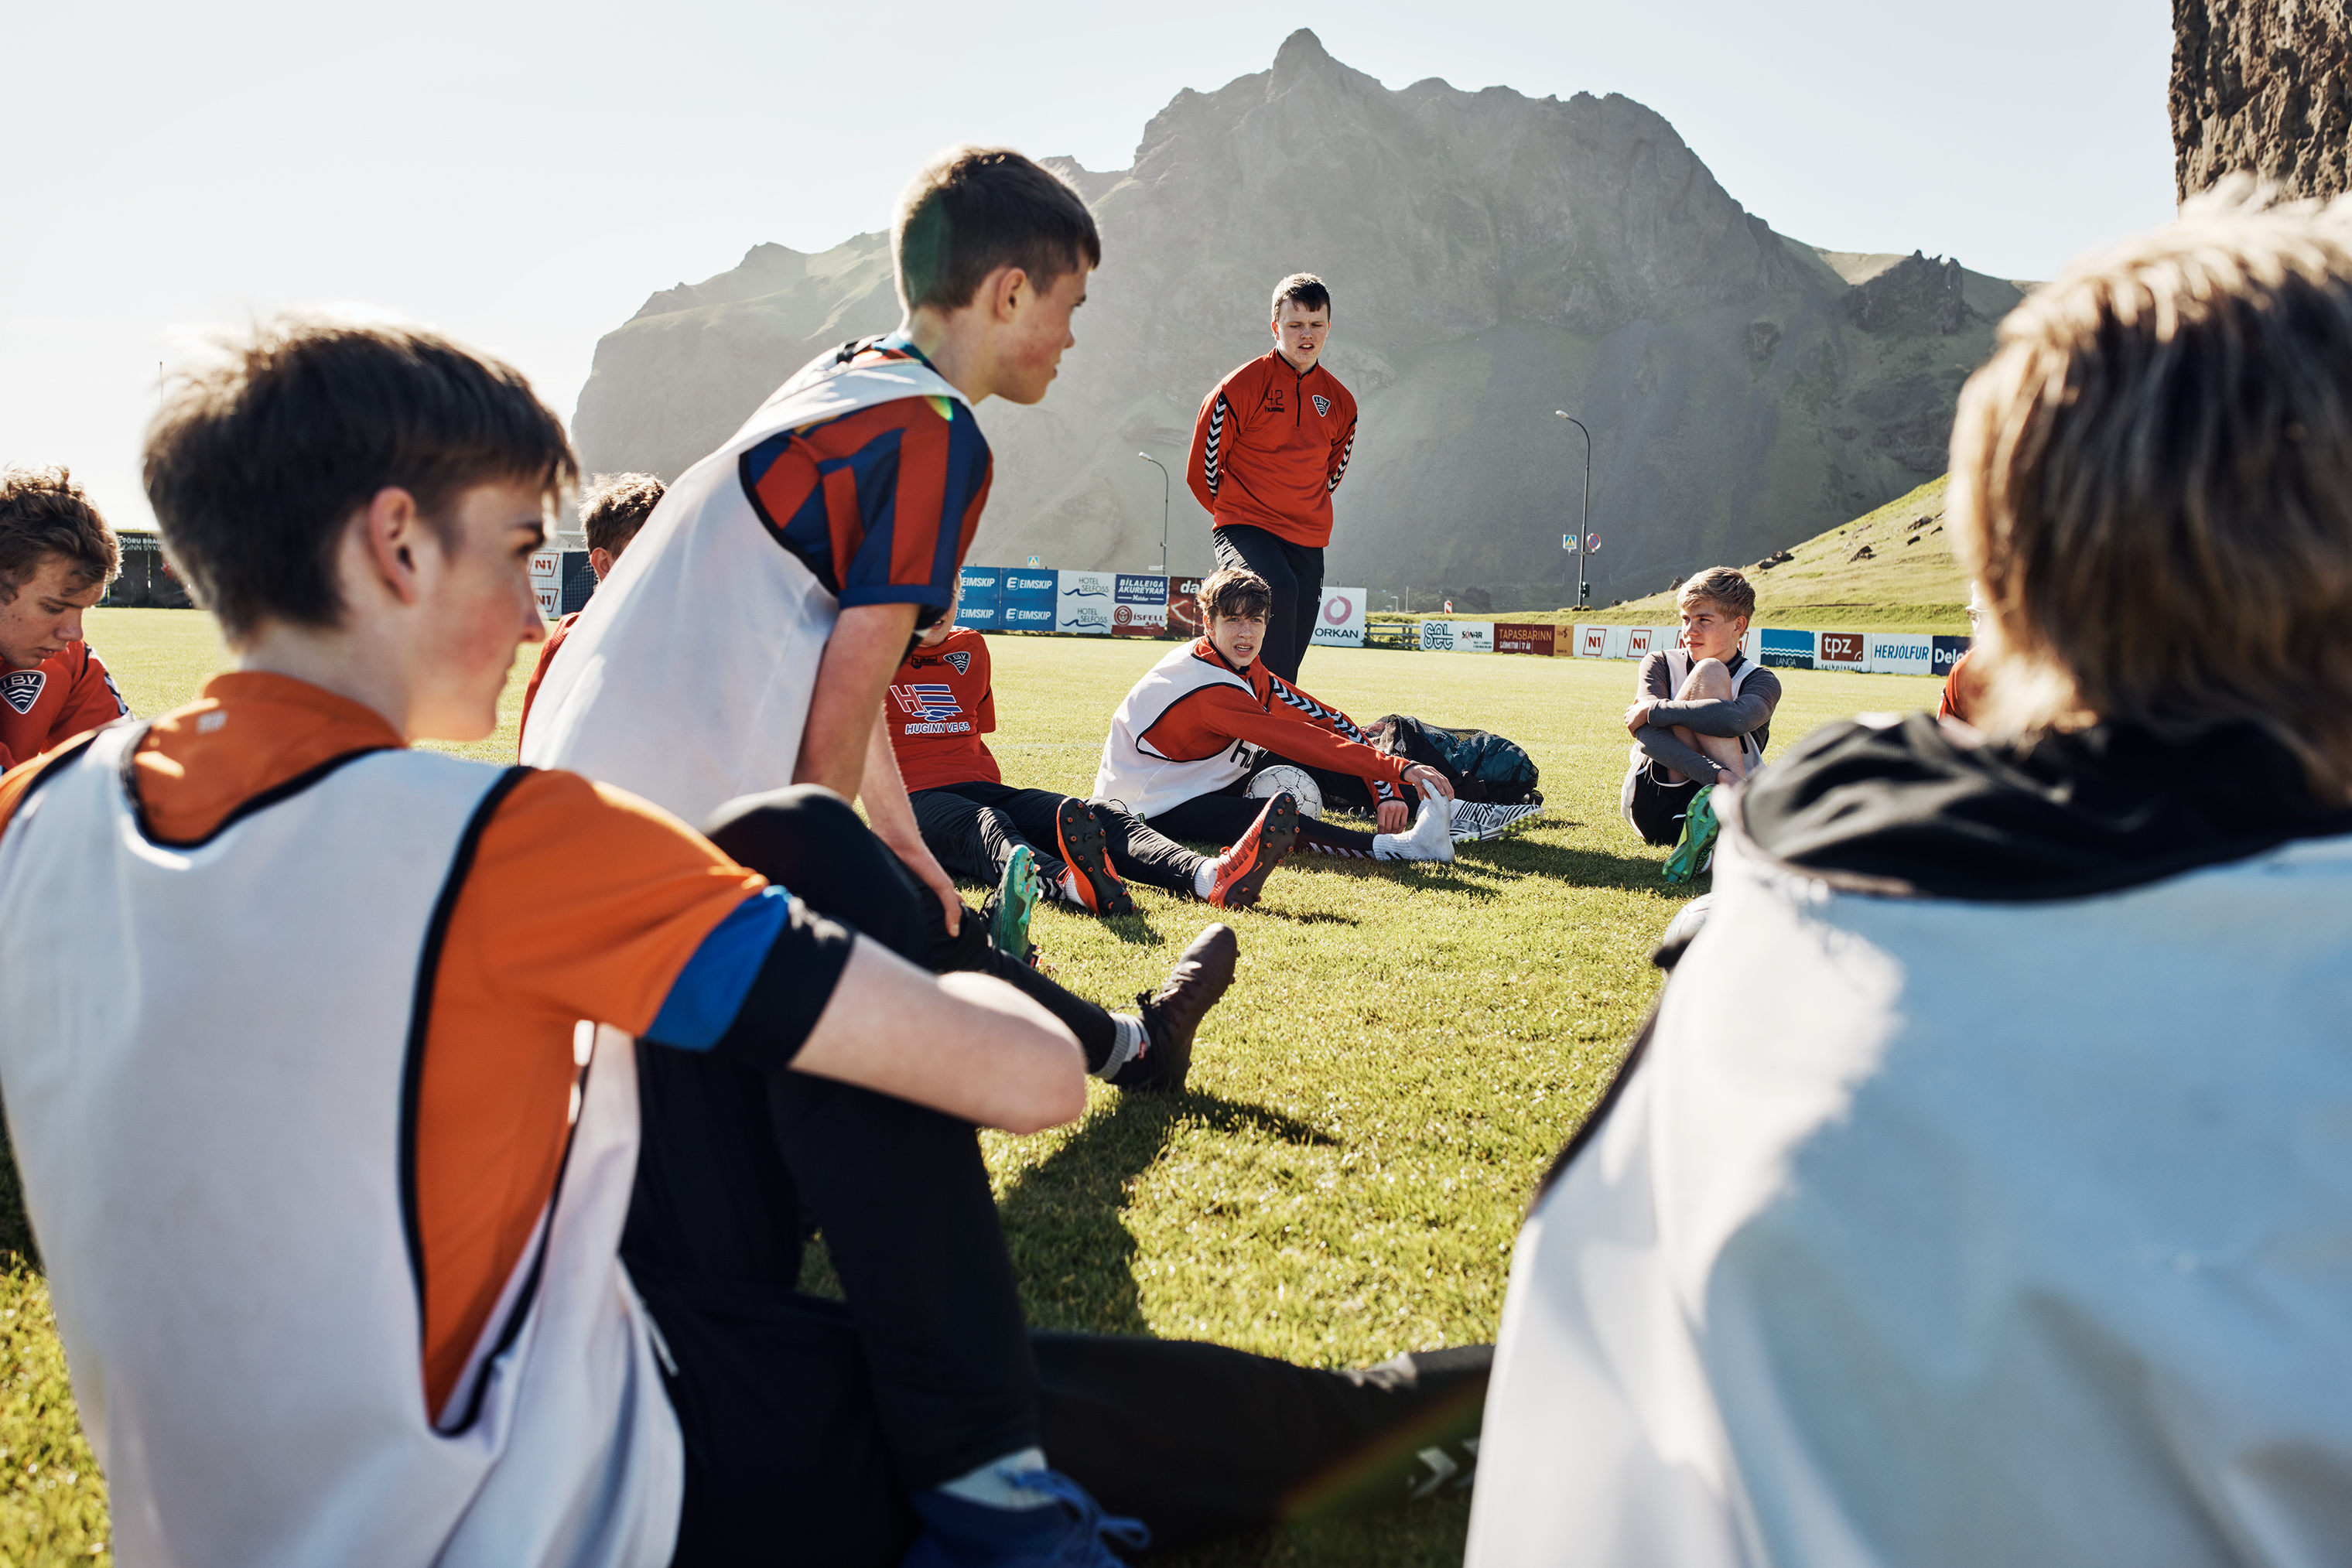 Boys rest after practice on Heimaey—or Home Island (pop. 4,500)—the largest in Iceland’s Vestmannaeyjar archipelago, on June 1. (Thomas Prior for TIME)